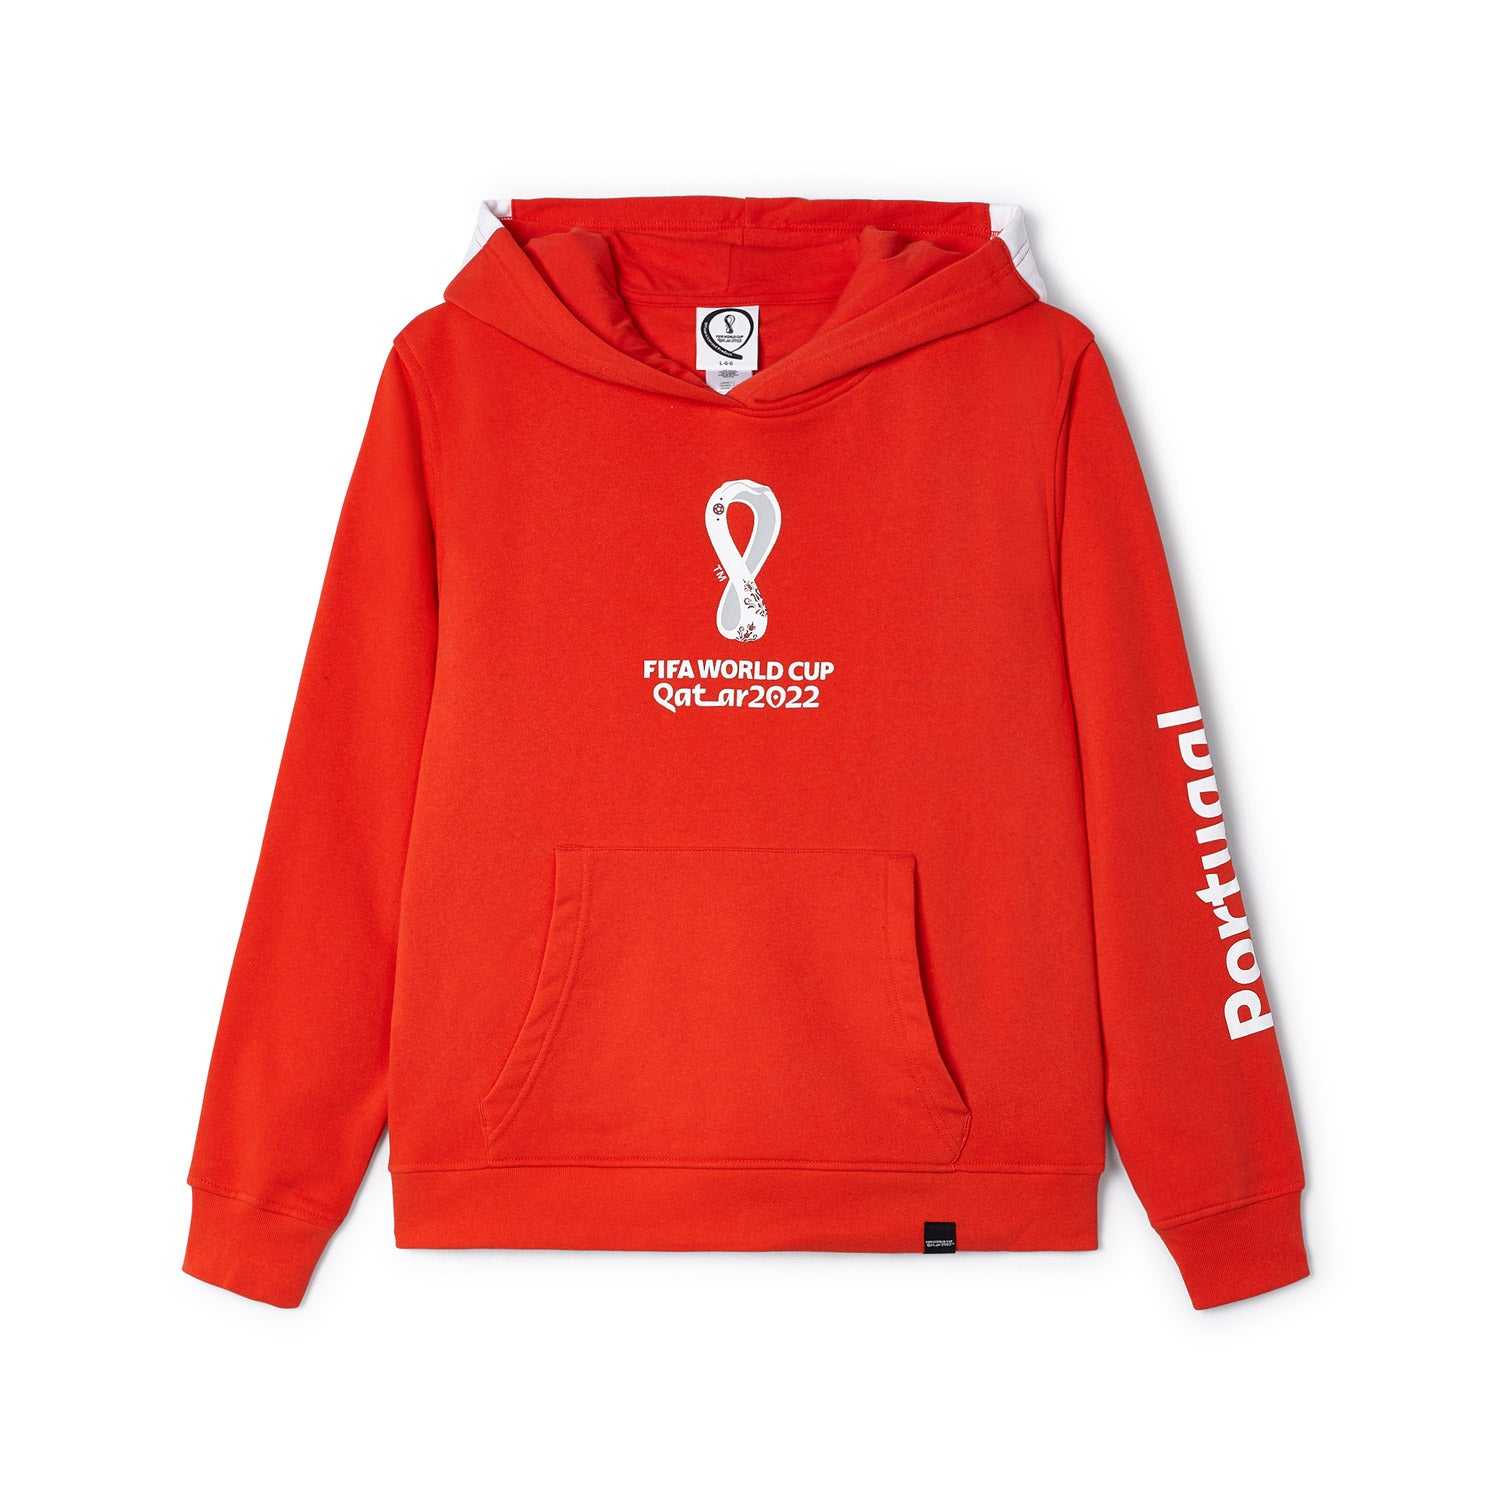 2022 World Cup Portugal Red Hoodie - Women's